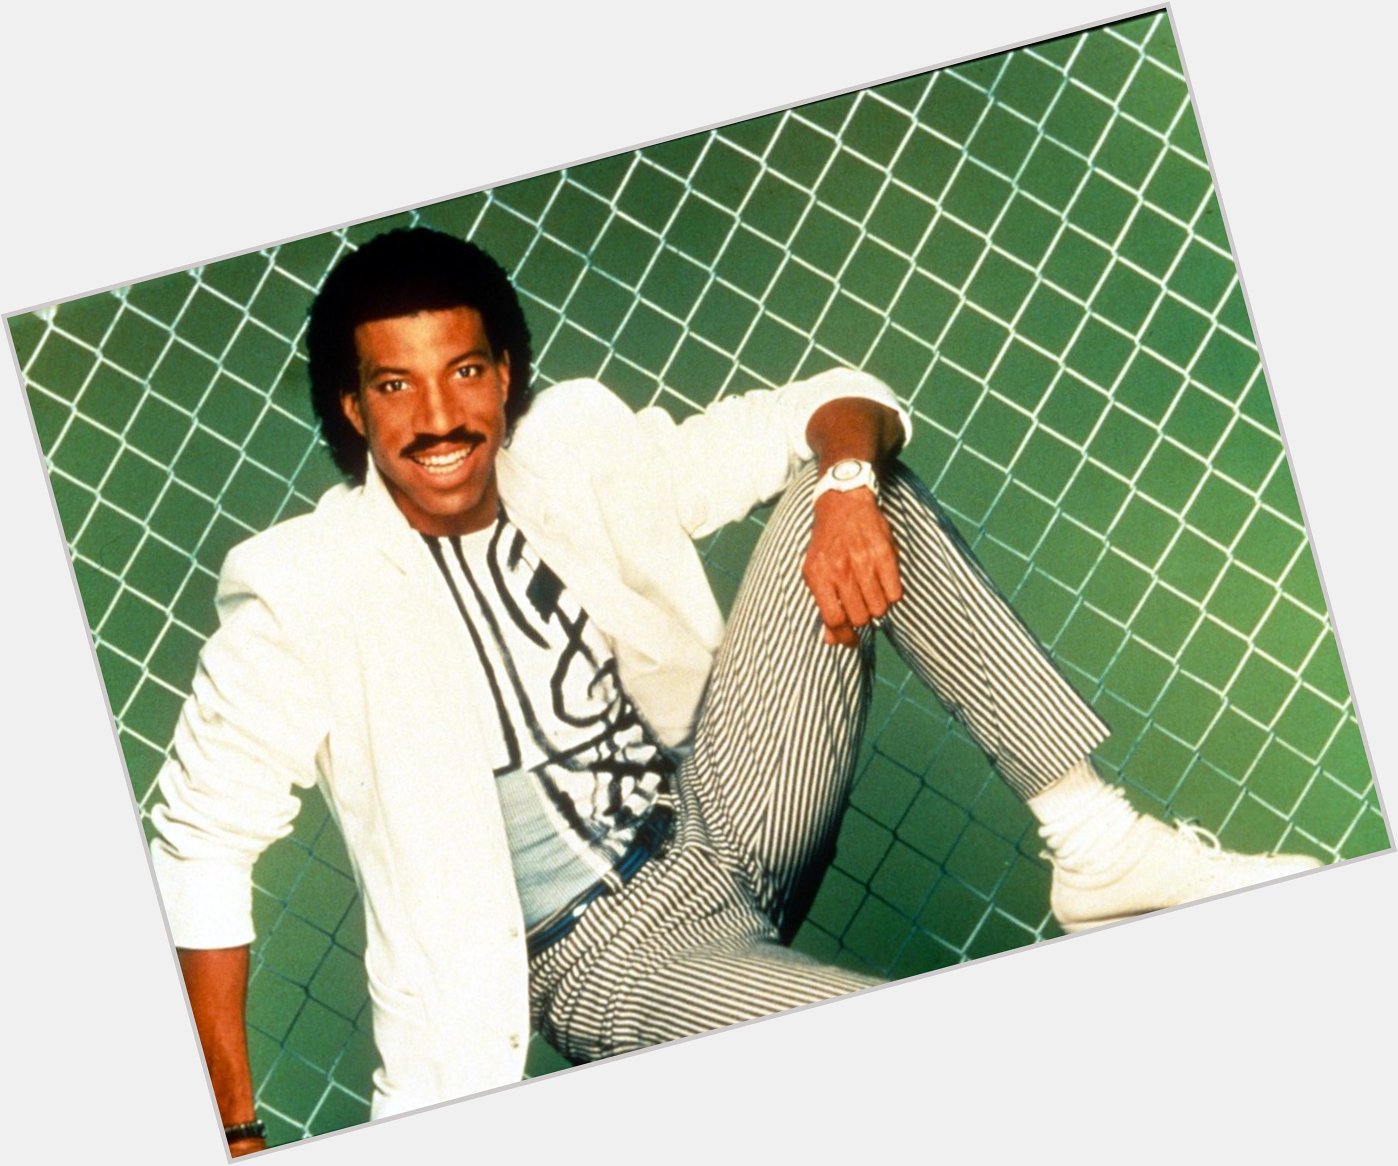 Happy Birthday to Lionel Richie who turns 72 today! 